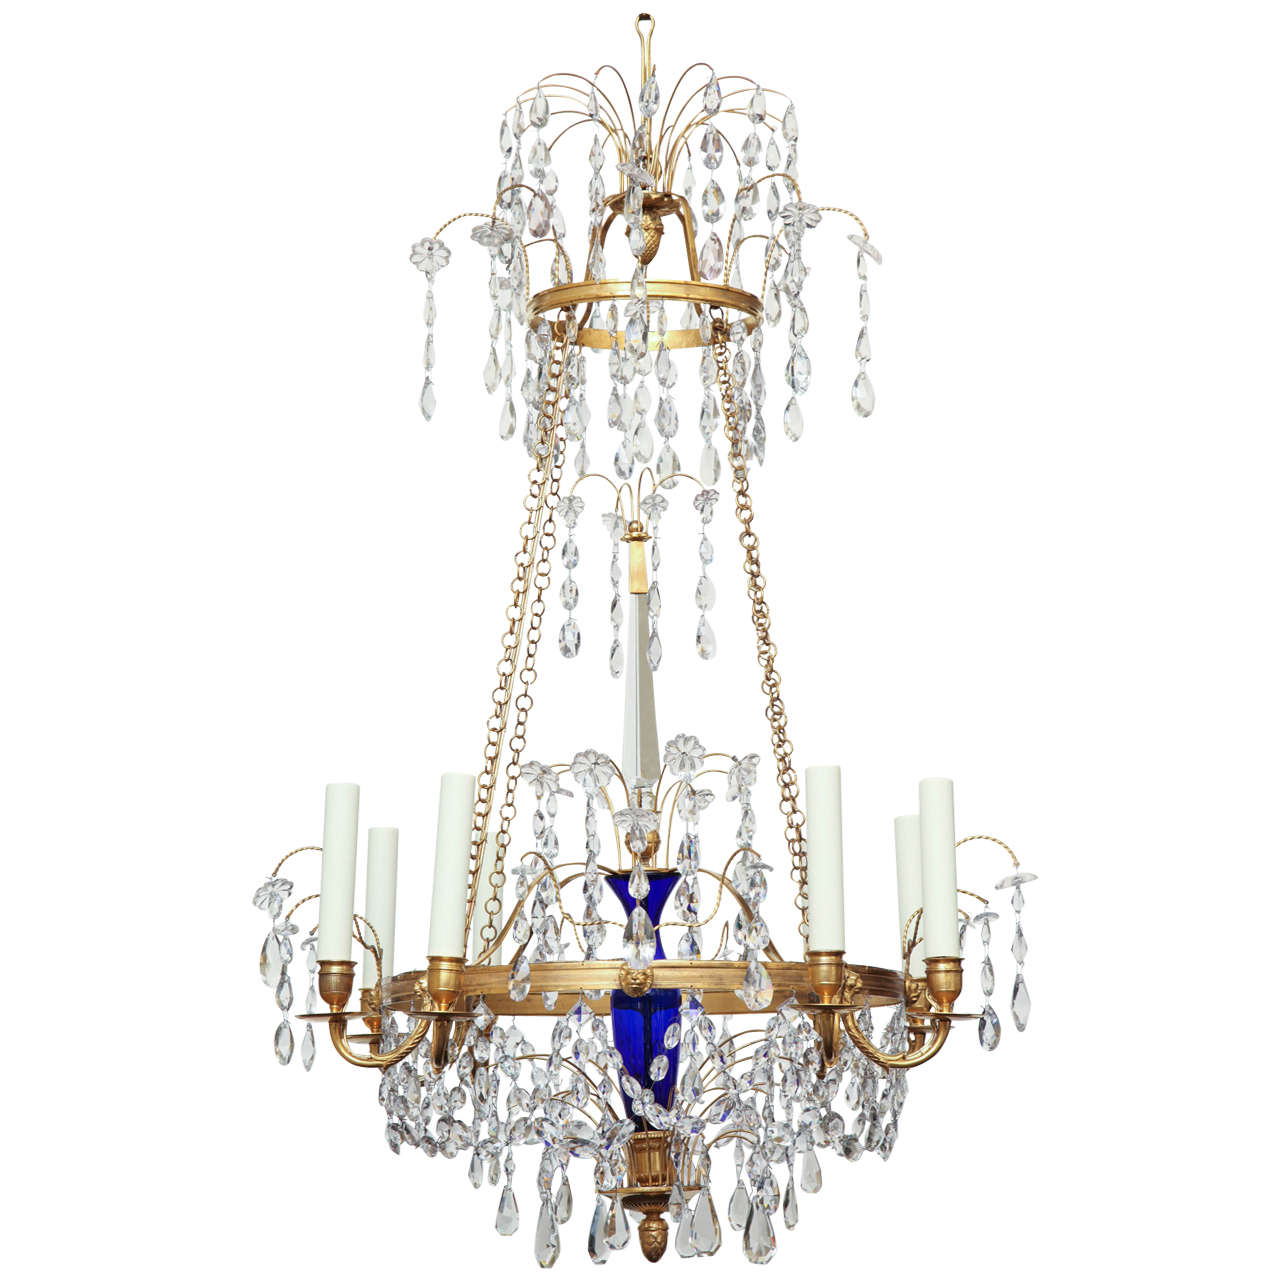 Early 20th Century Russian Bronze, Cobalt and Crystal Chandelier For Sale